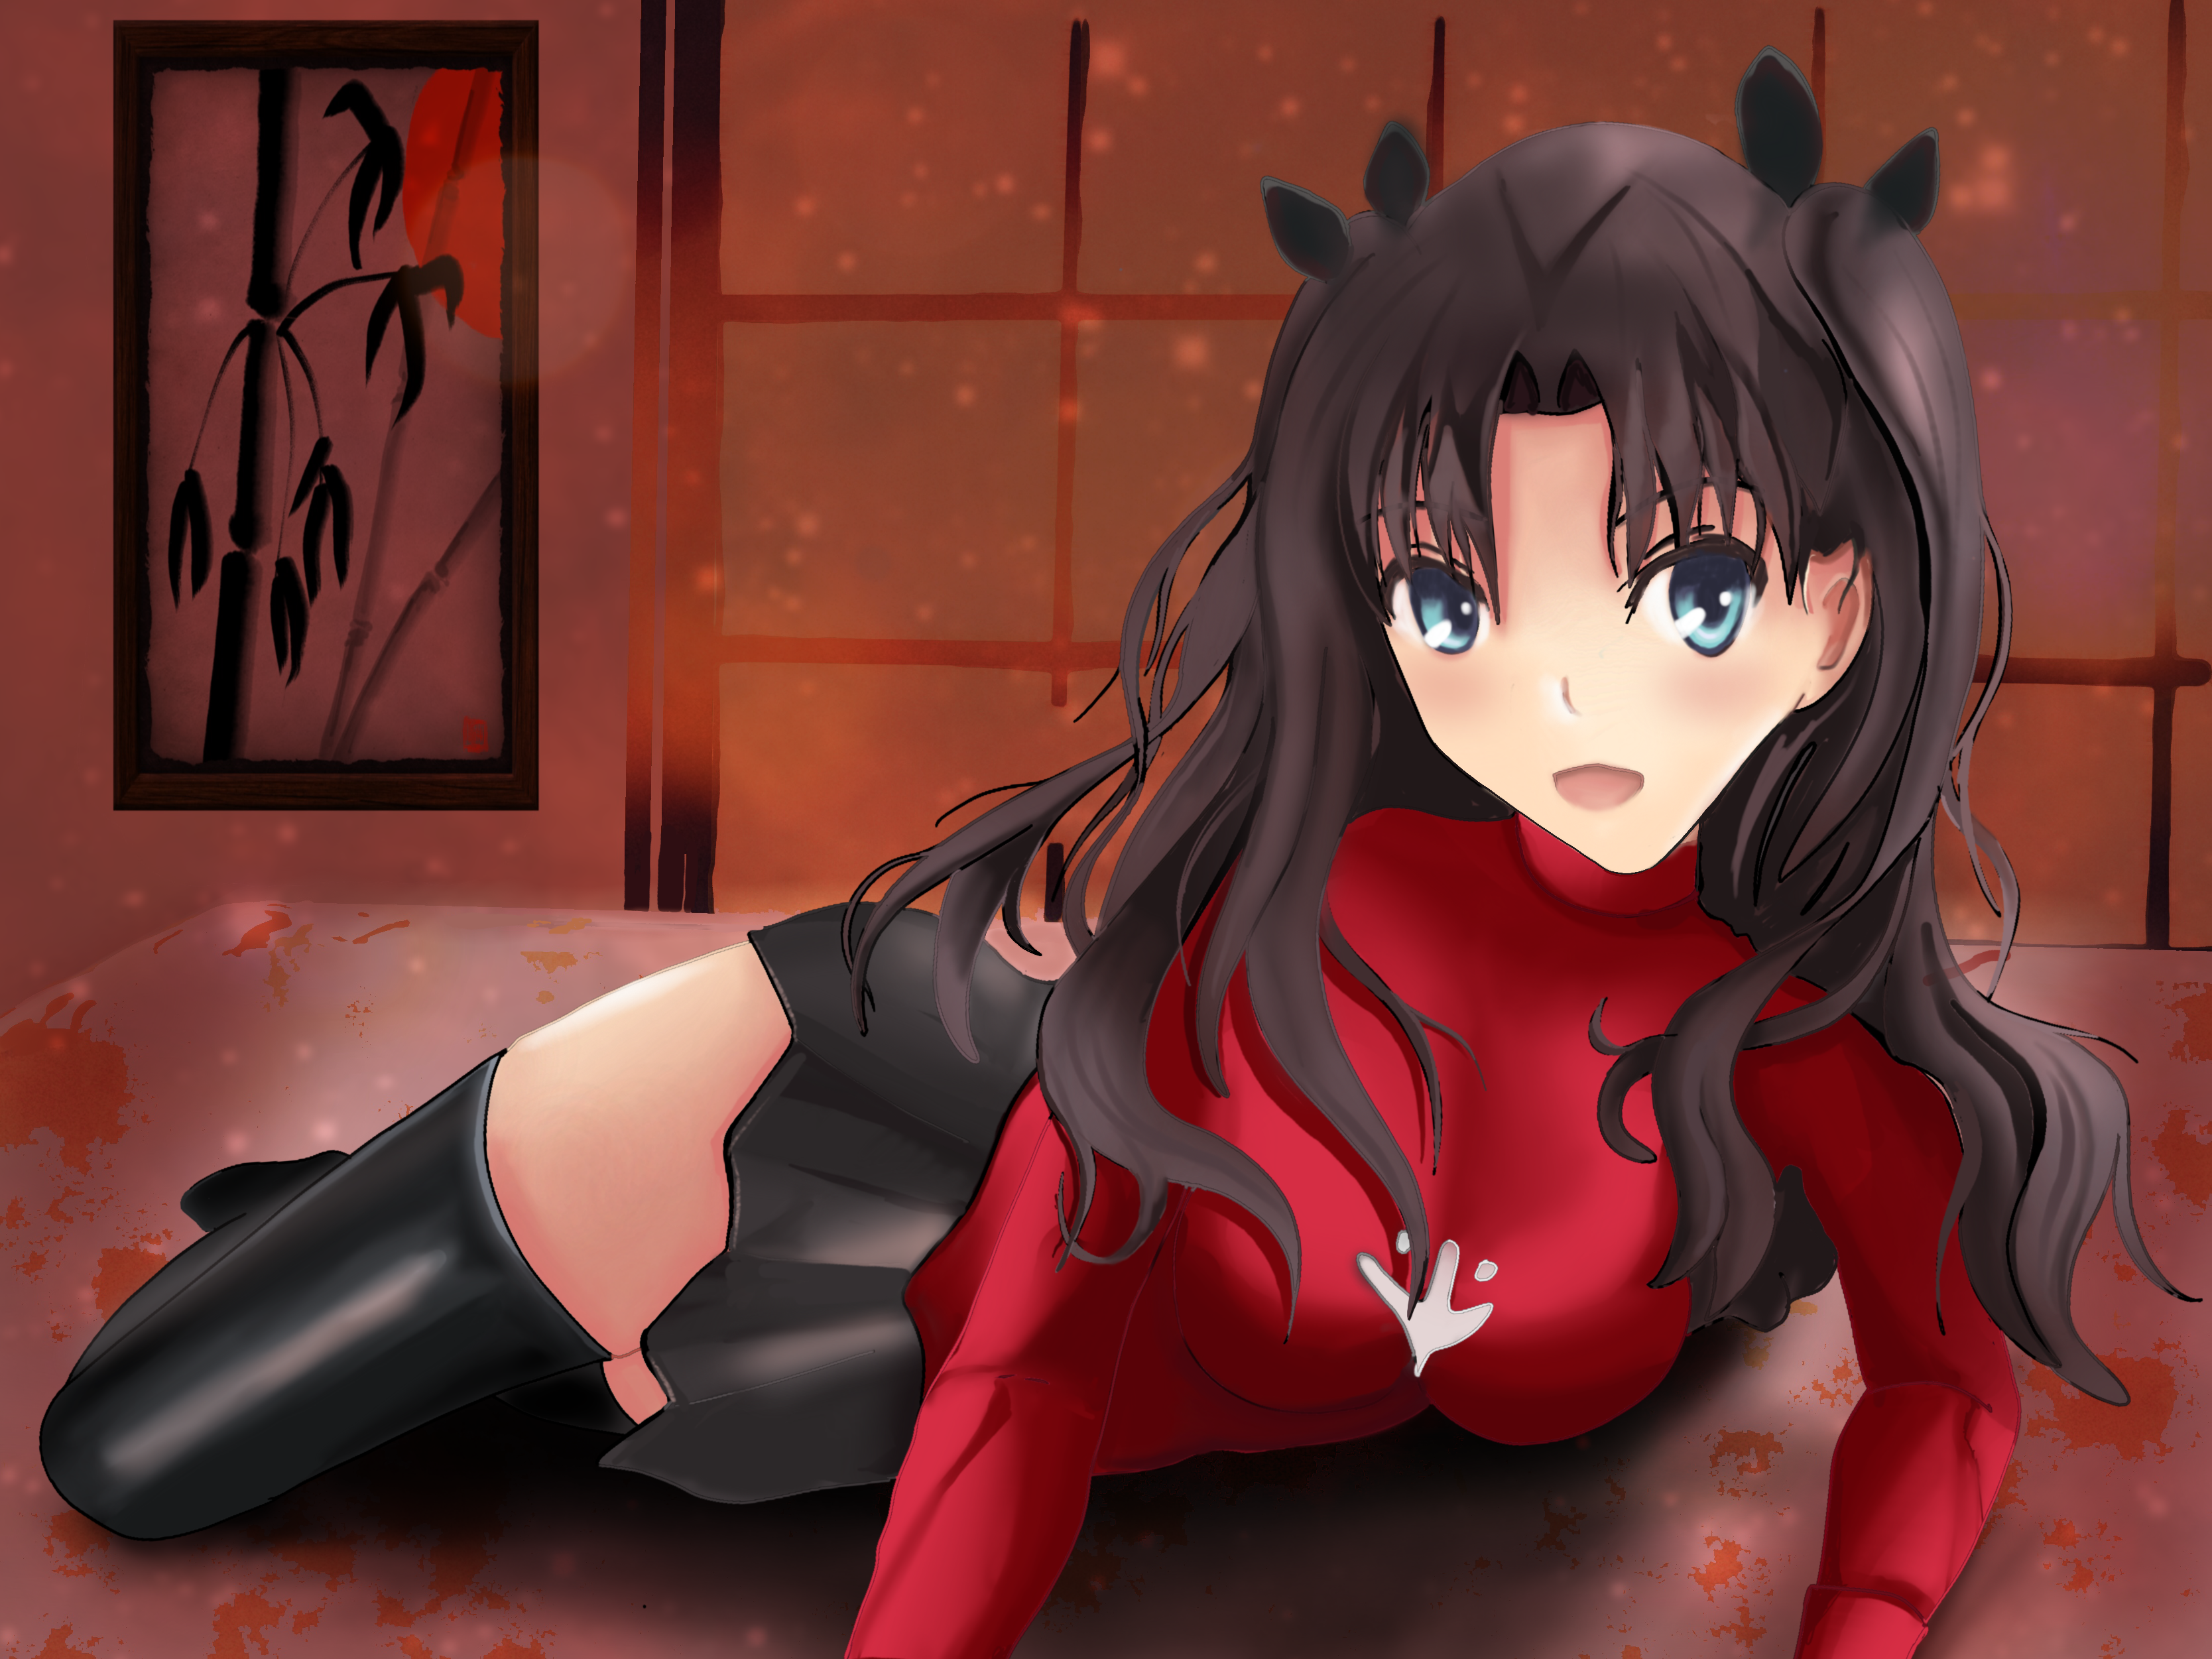 Rin on bed by Zazza